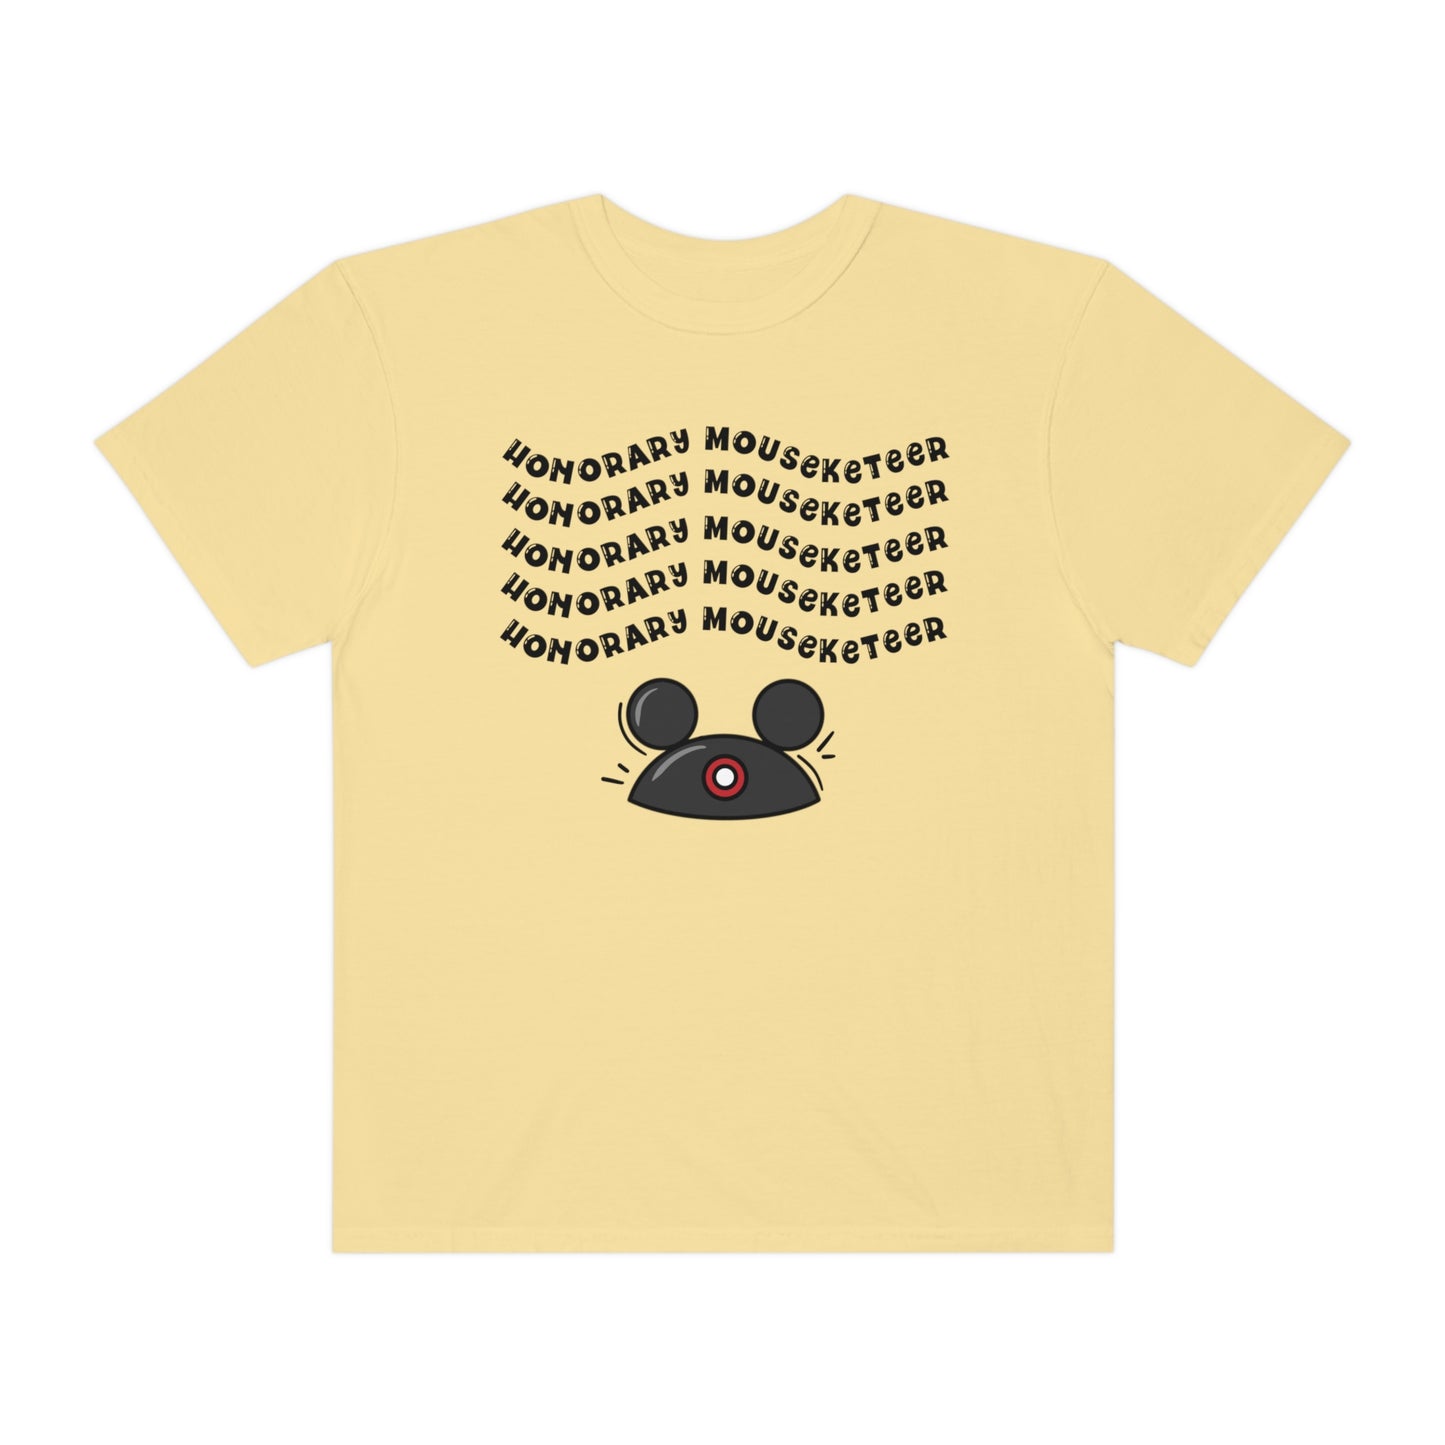 Adult Honorary Mouseketeer - Comfort Colors